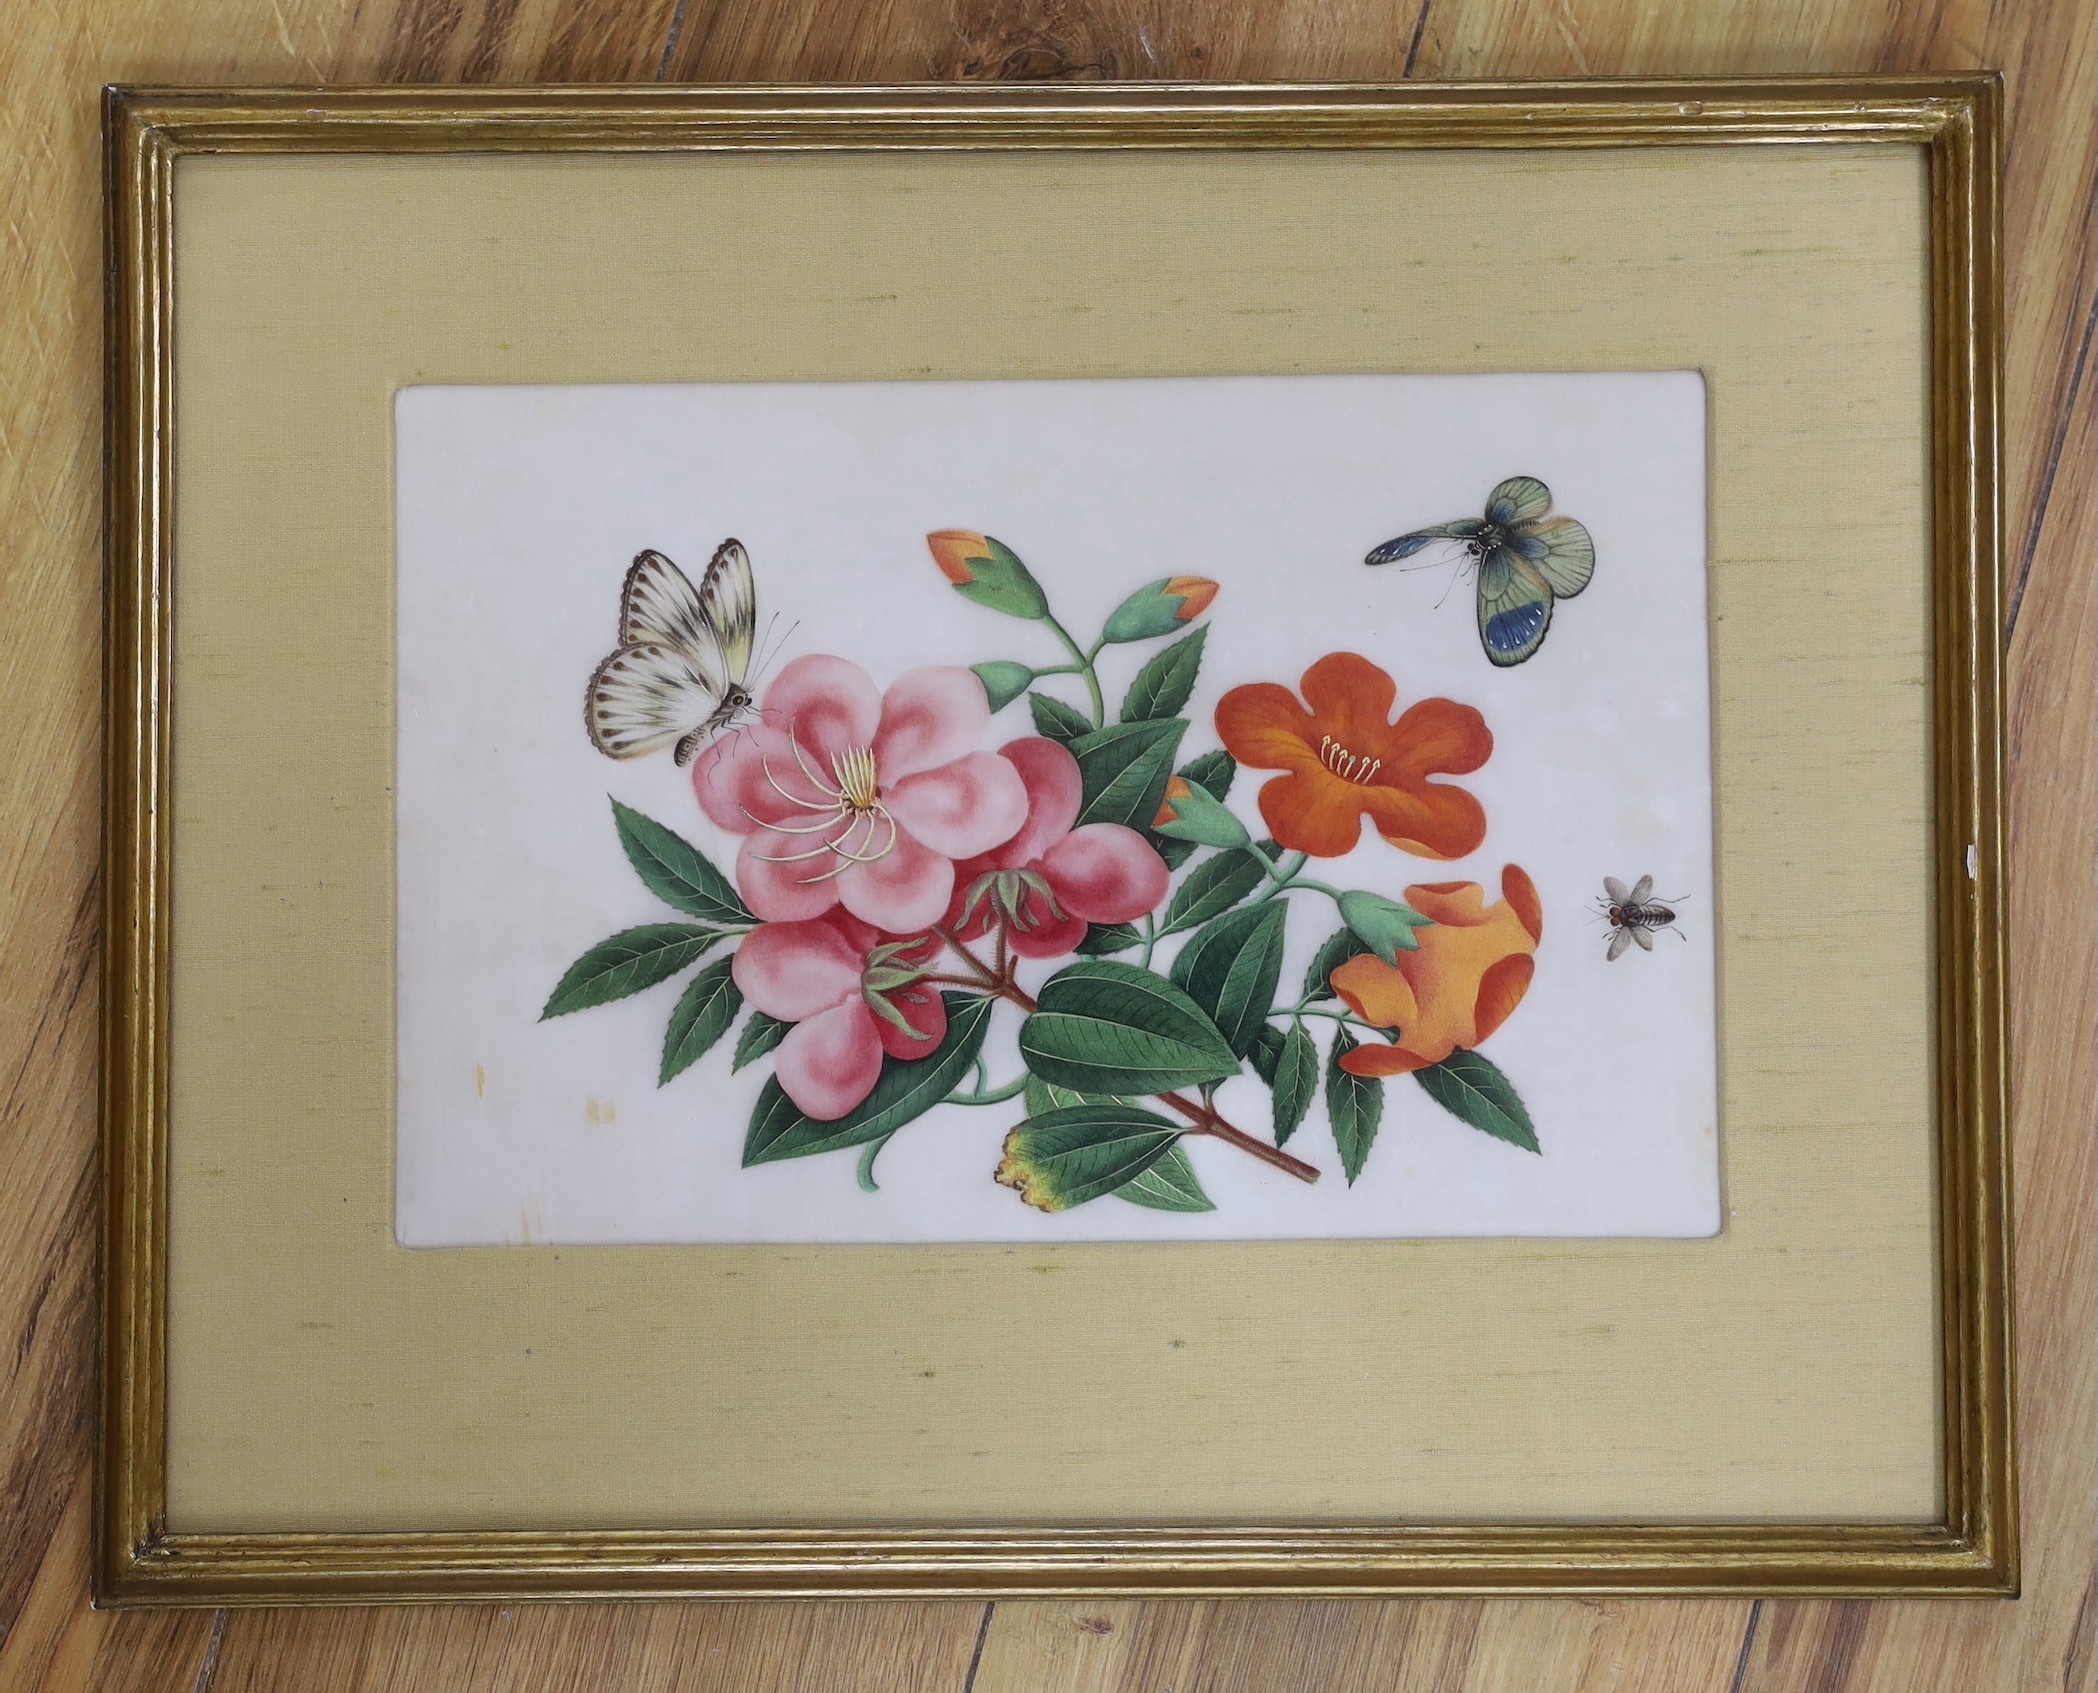 19th century Chinese School, gouache on pith paper, Butterflies and flowers, 18 x 28cm